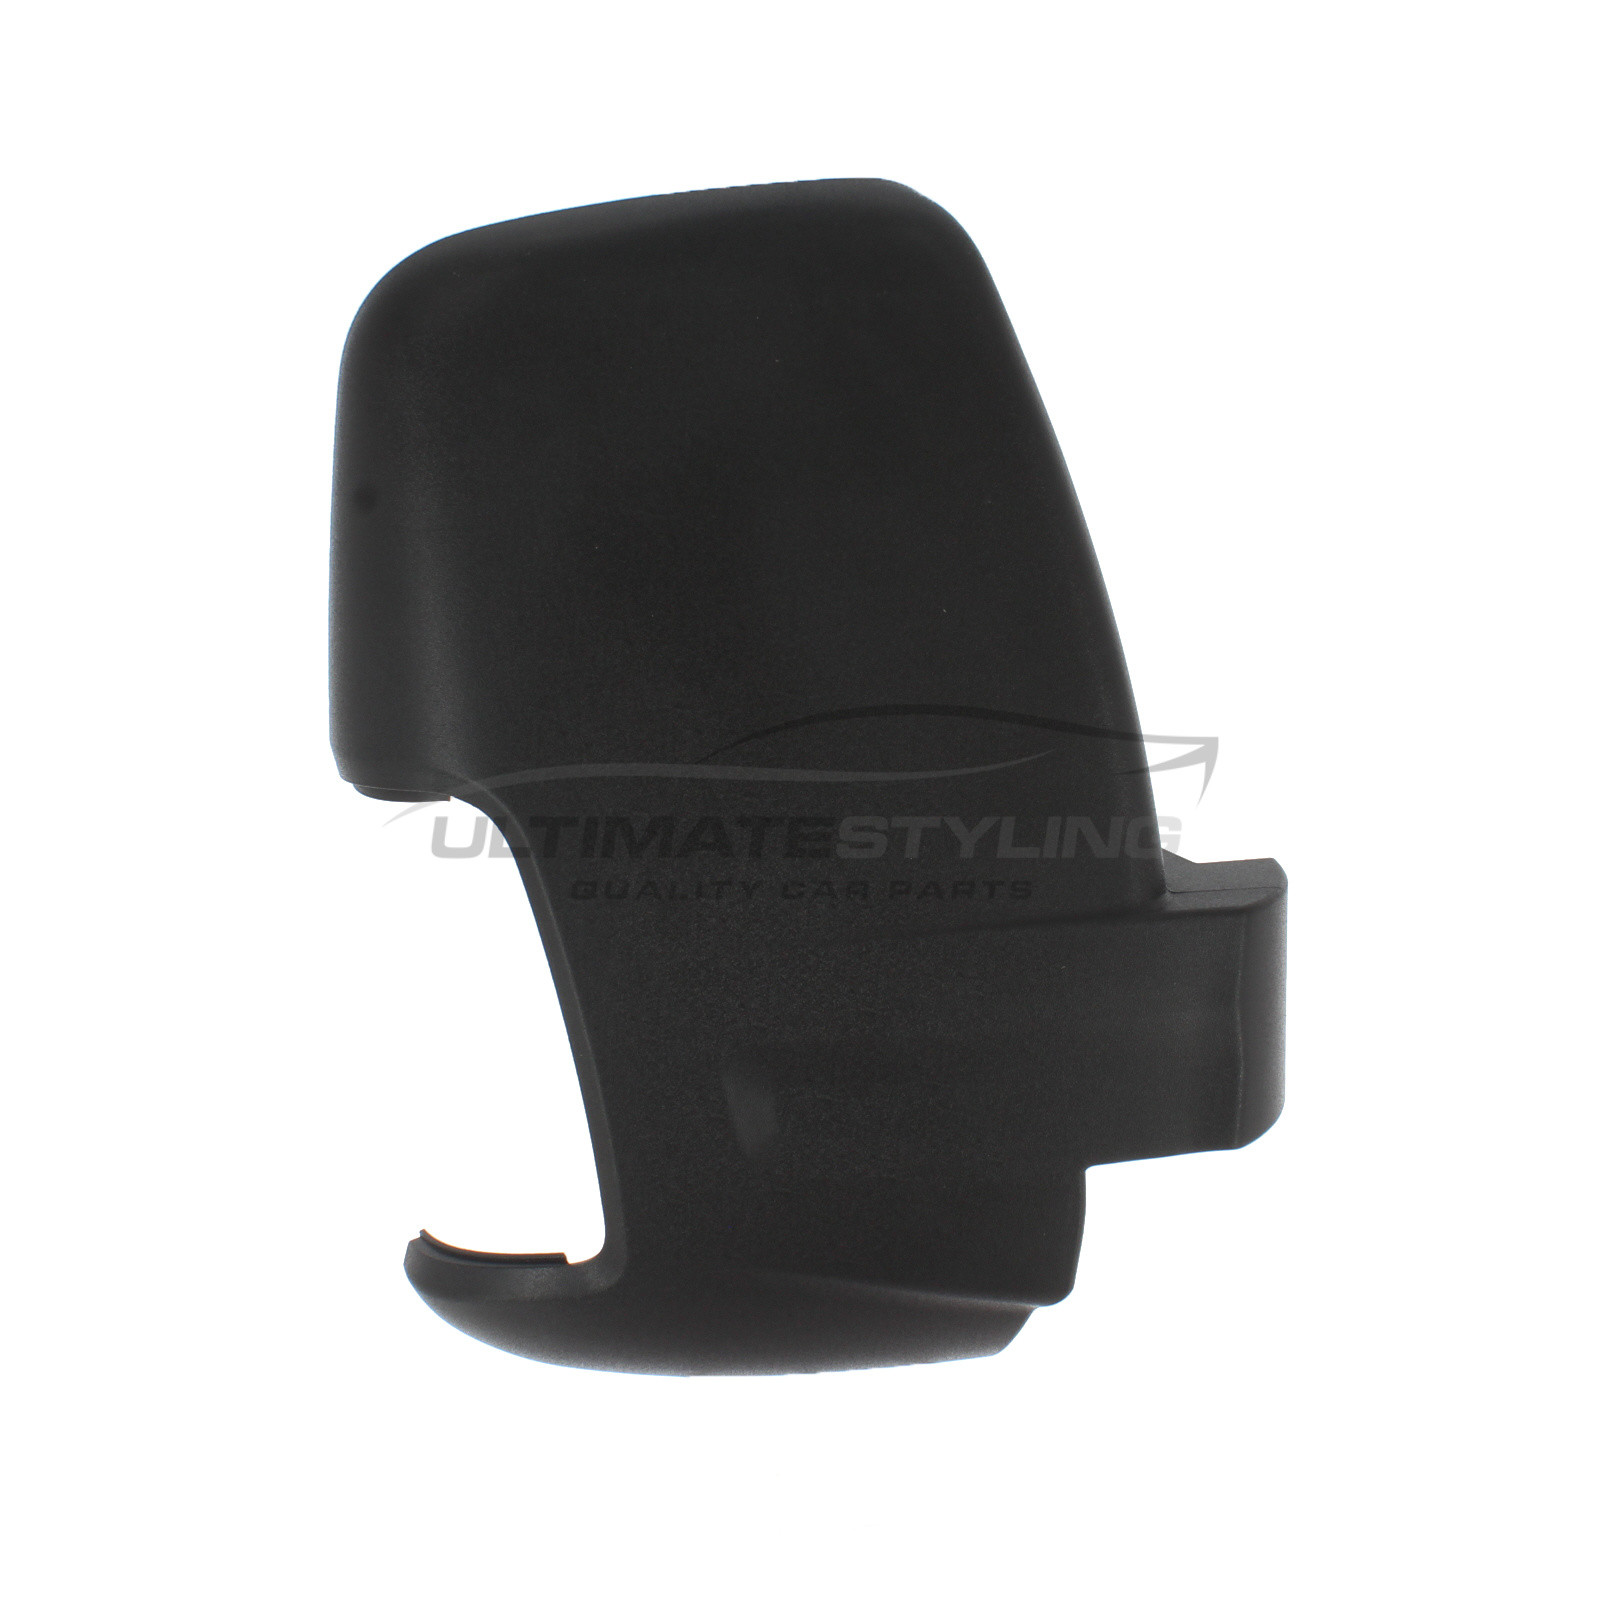 Ford Transit 2014-> Wing Mirror Cover Cap Casing Black (Textured) Drivers Side (RH)